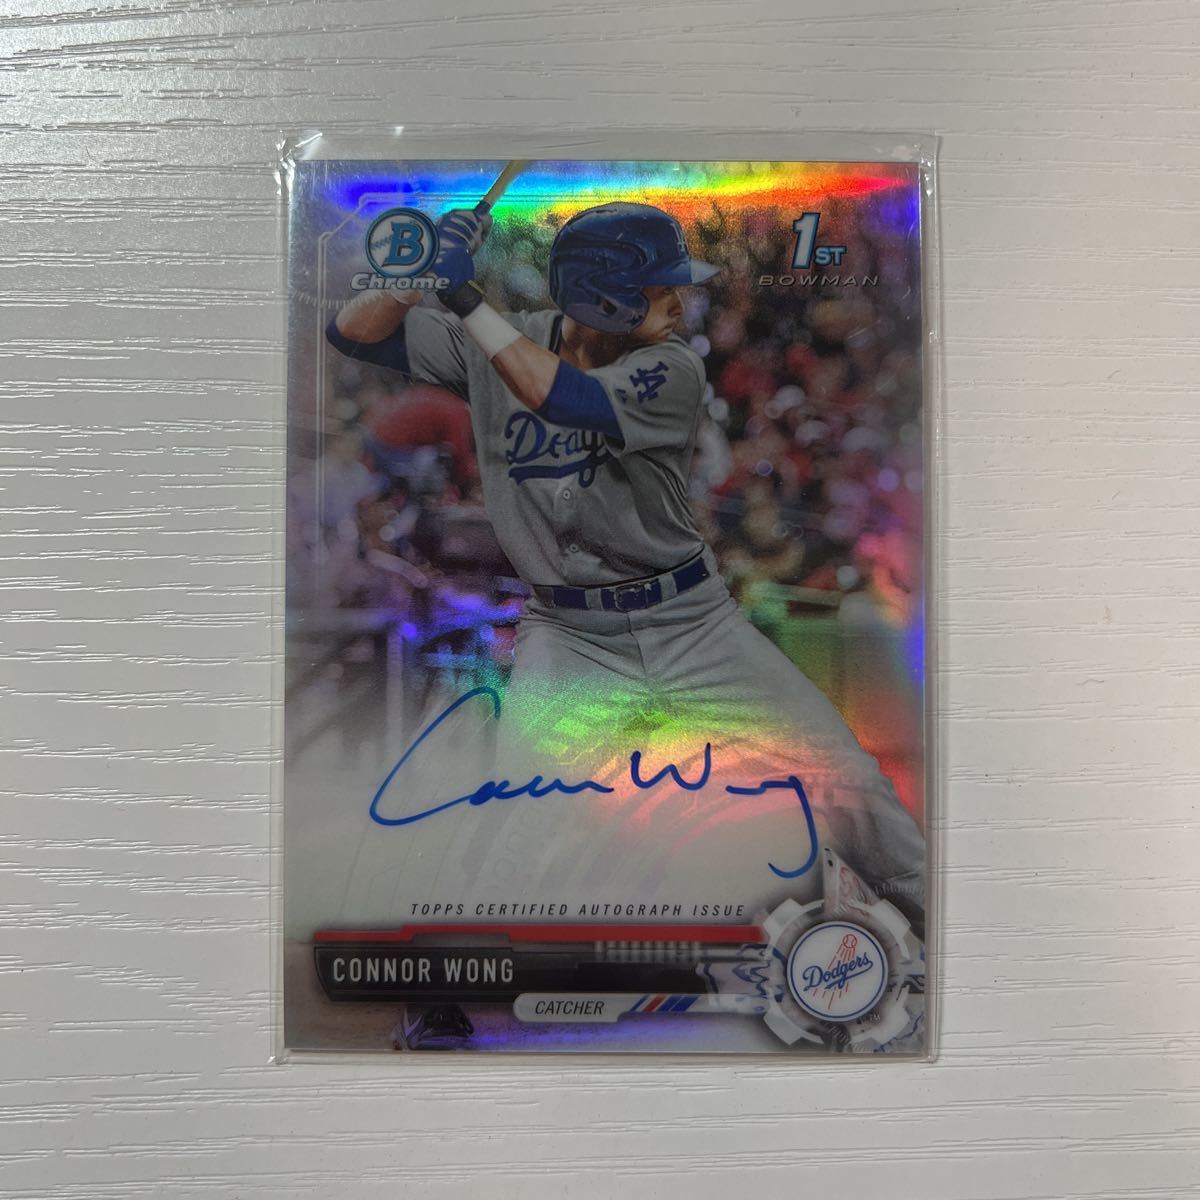 2017 Bowman Draft Chrome Connor Wong refractor auto 499枚限定の画像1